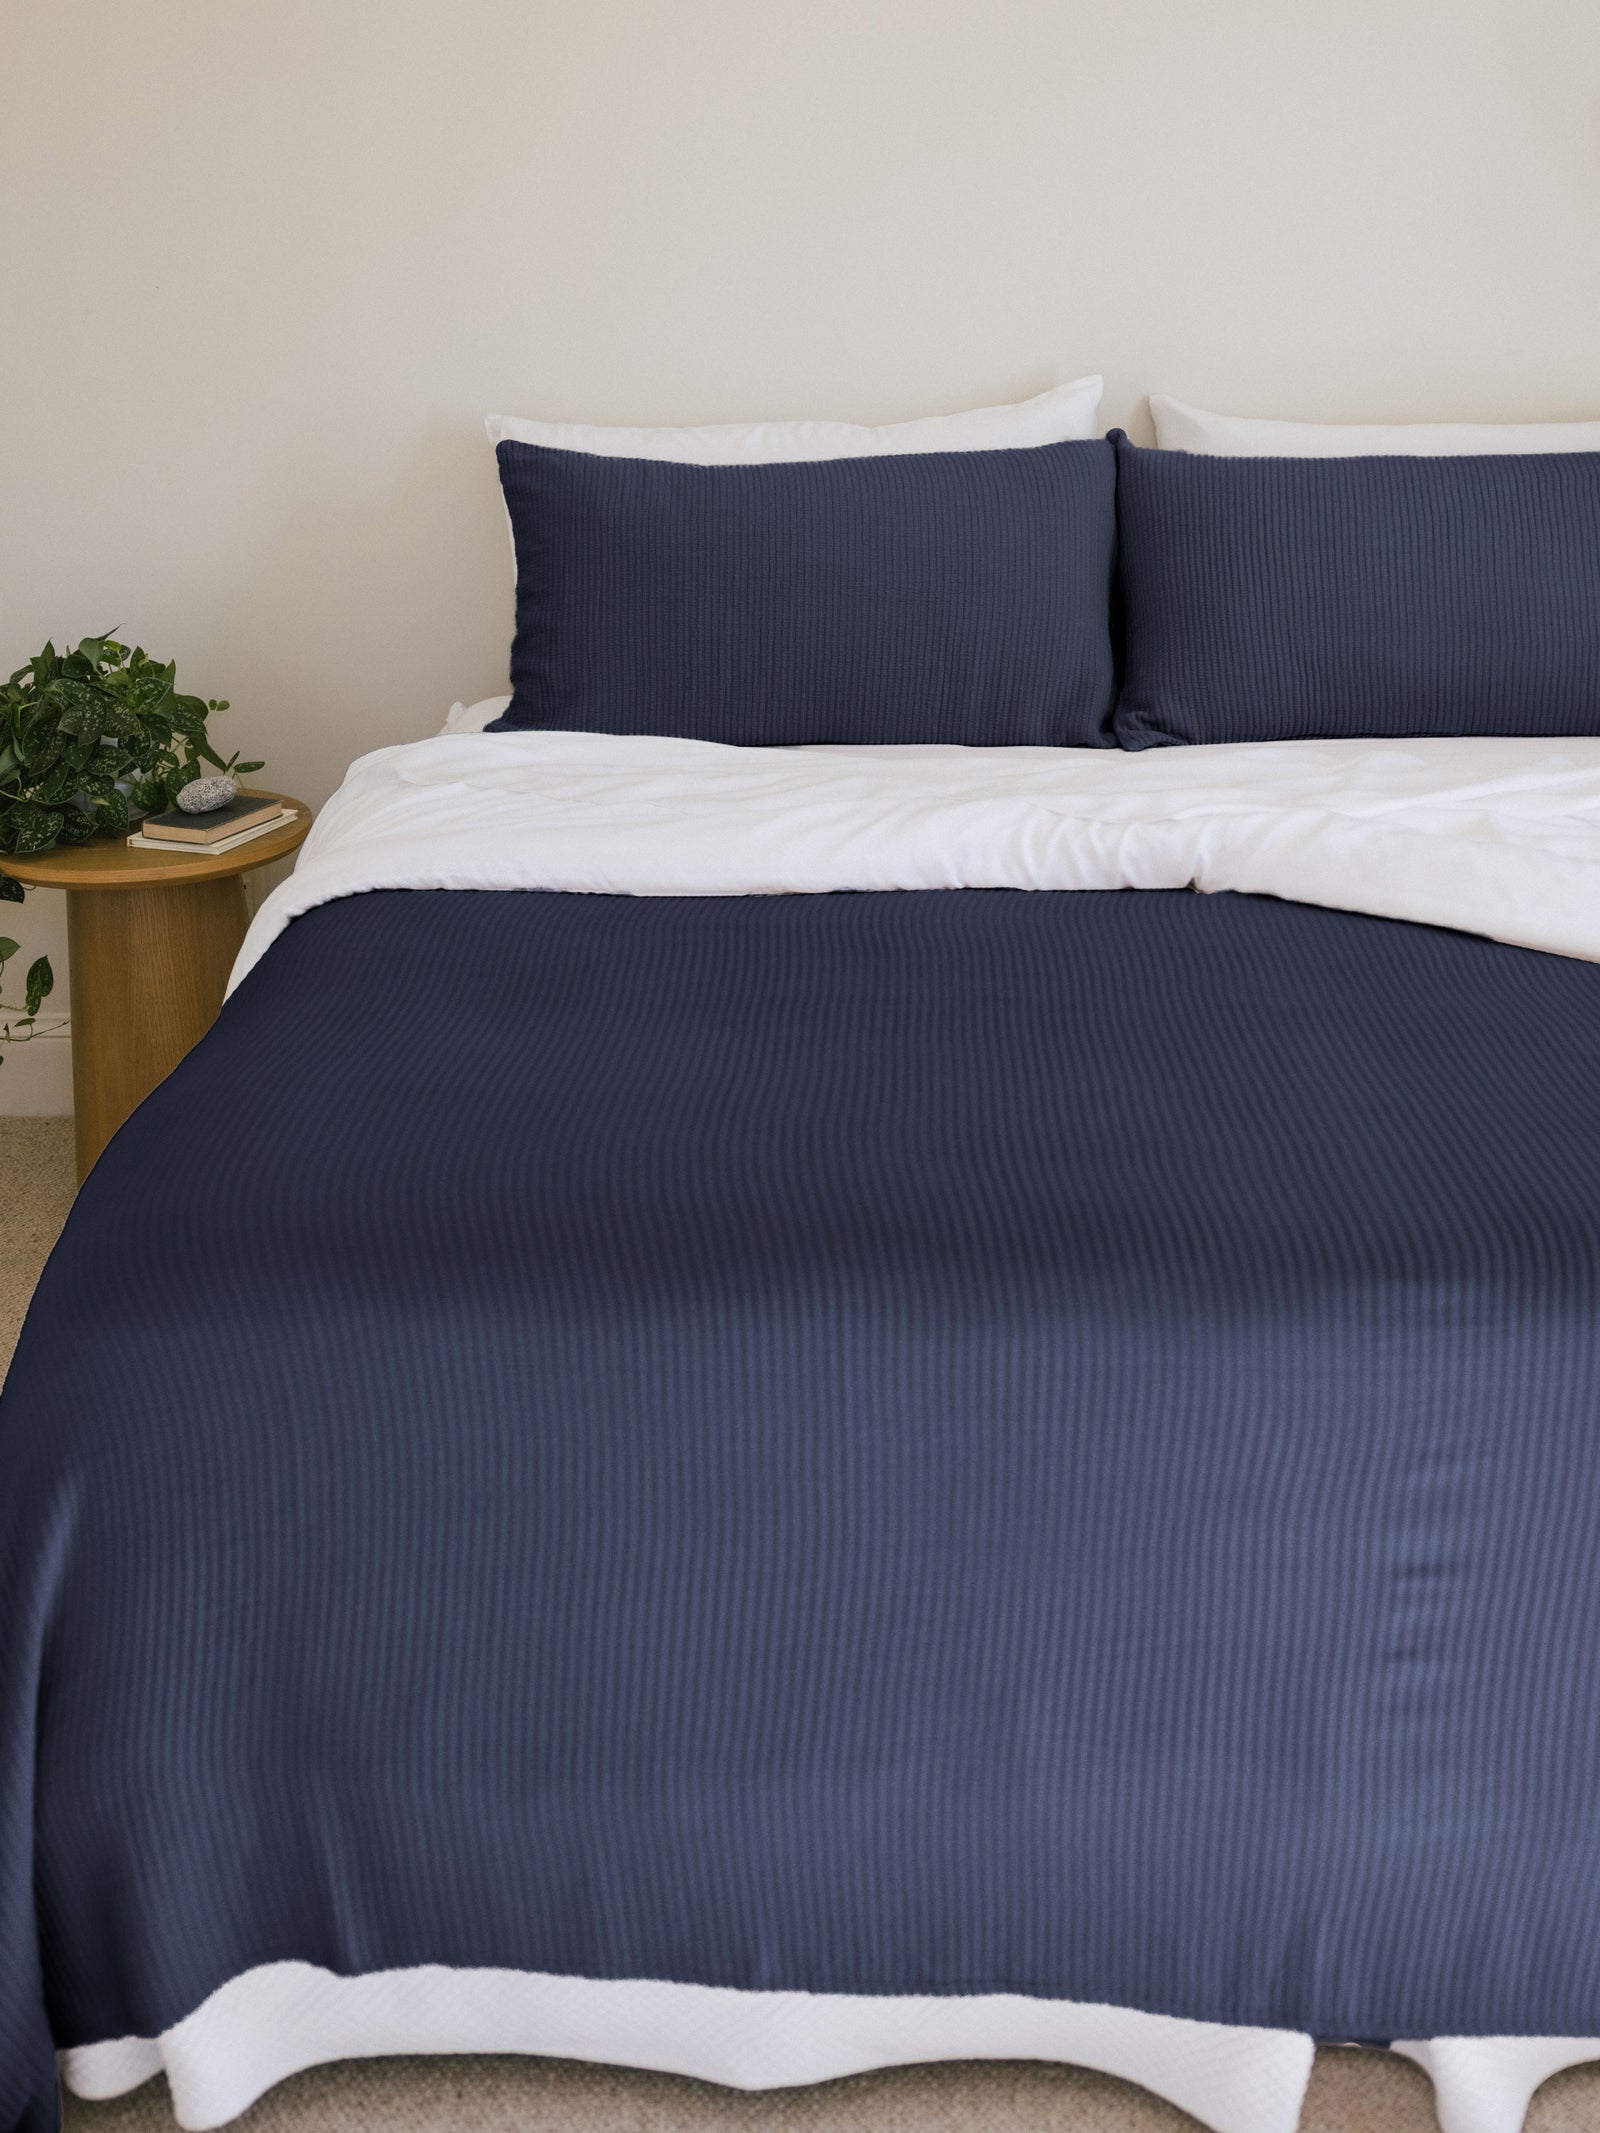 Navy coverlet and shams on a bed 